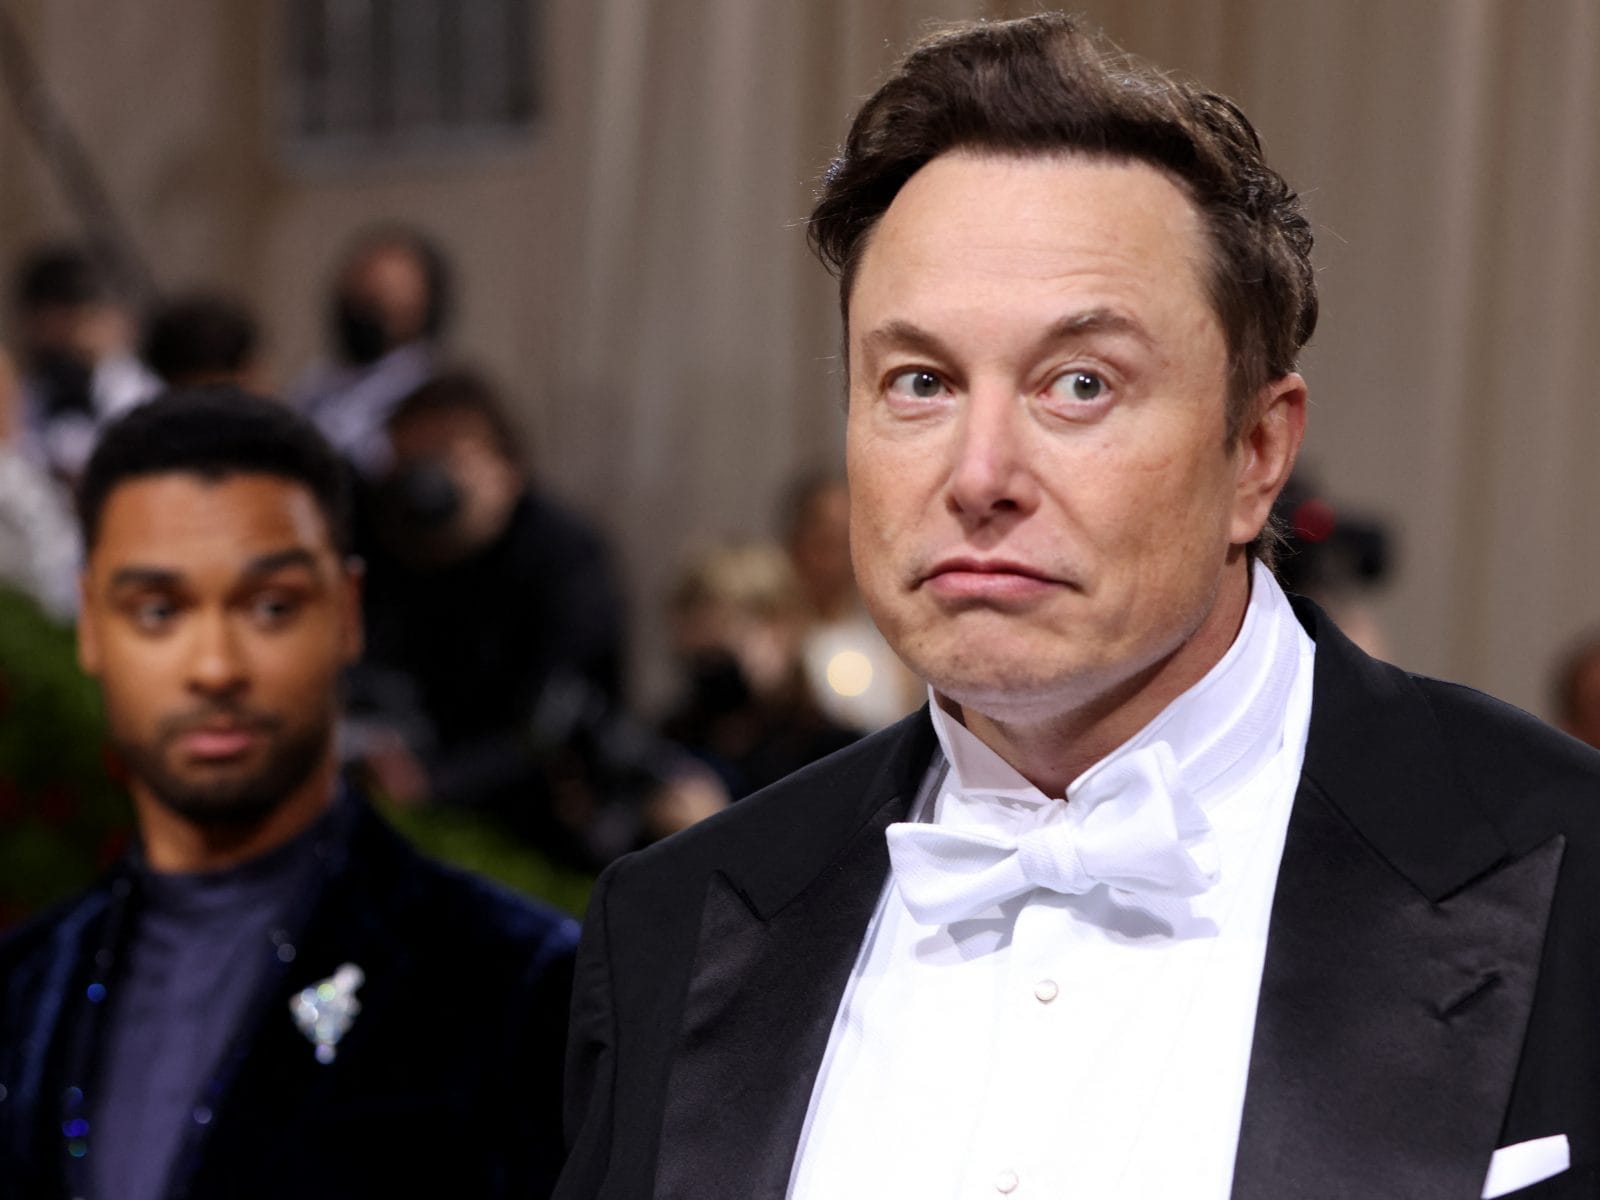 Defending himself, Elon Musk tells the former president to ‘hang up his hat.’